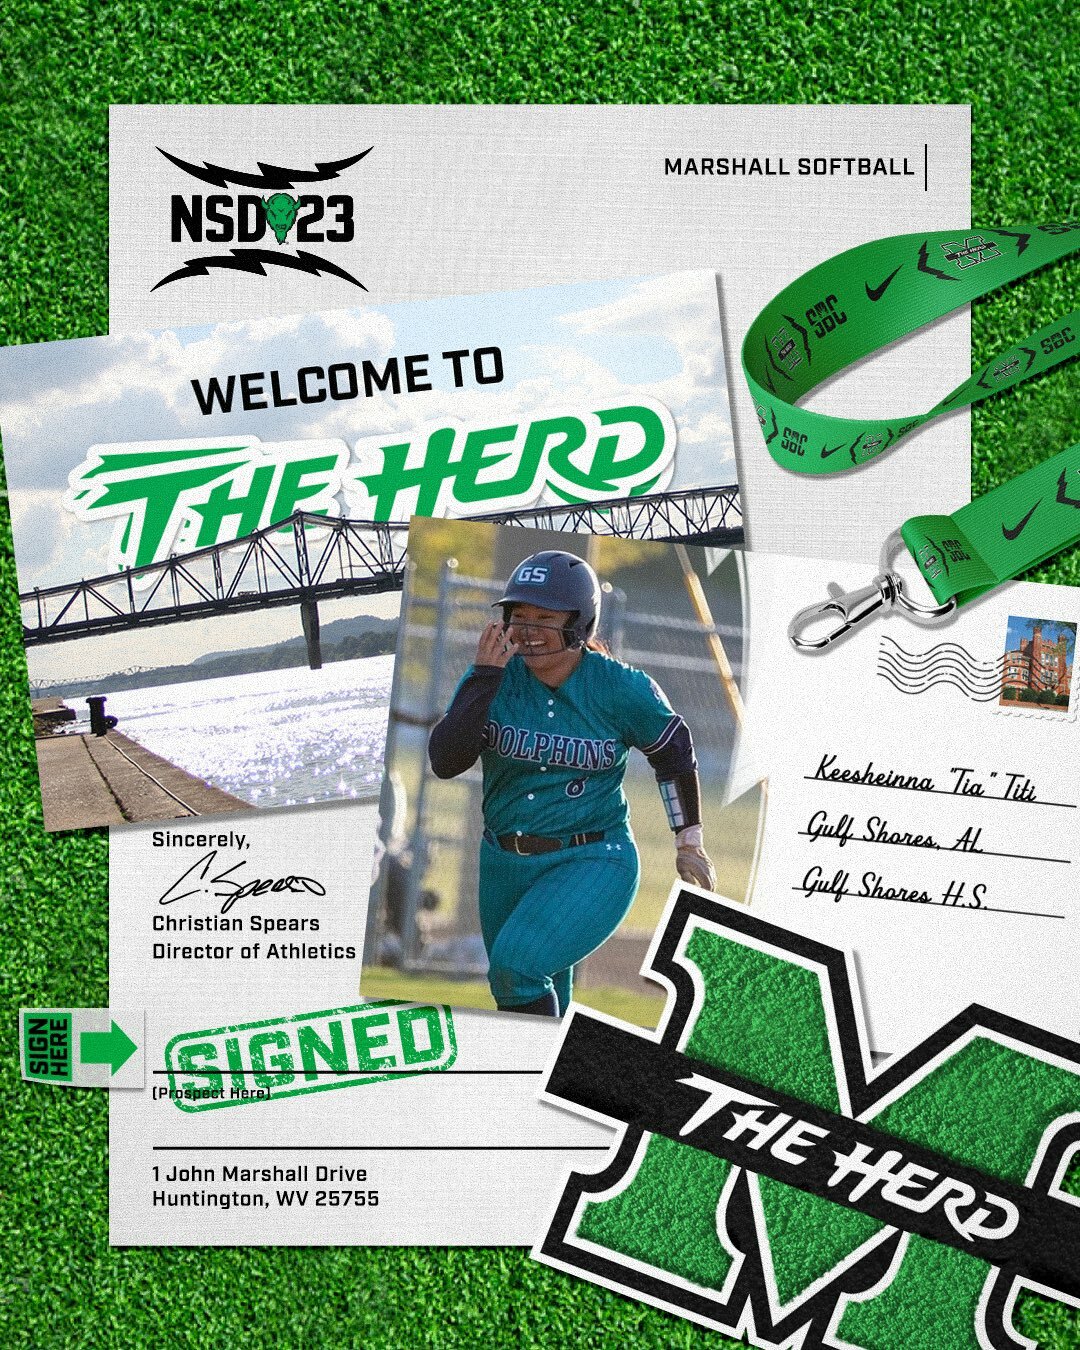 One of the additions to next year’s Marshall softball team will come from Gulf Shores in the form of all-state and all-star catcher Keesheinna “Tia” Titi. The Dolphin senior announced her commitment to the Thundering Herd on Sept. 5.